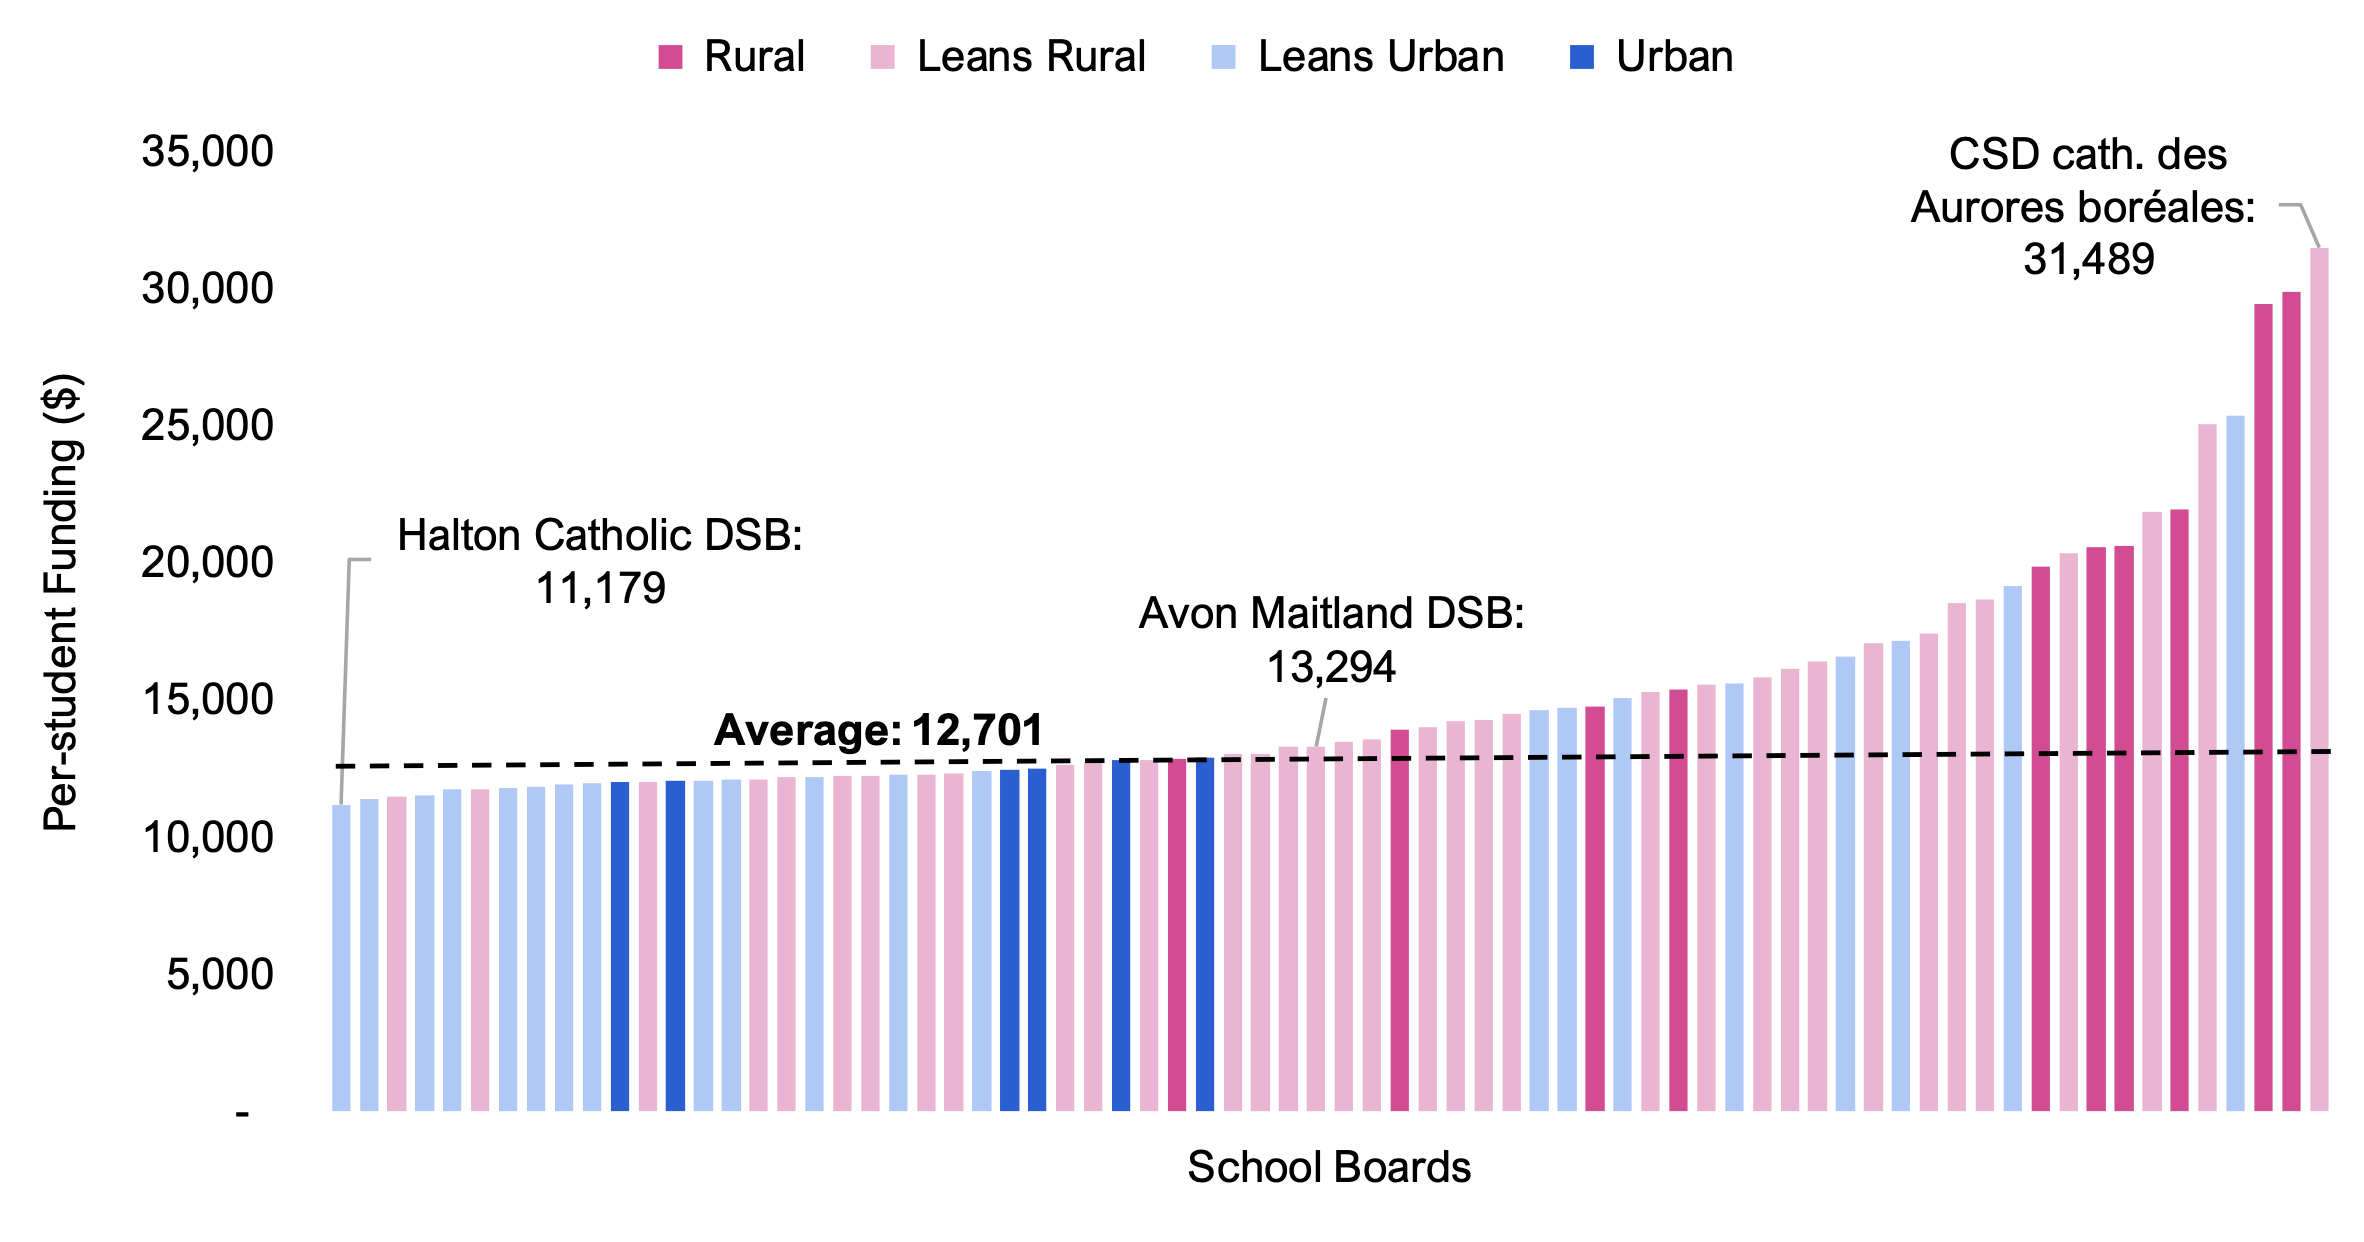 Figure 4.7 shows per-student GSN funding by school board, broken down by school board urban factor (rural, leans rural, leans urban, and urban). The values range from a low of $11,179 for the Halton Catholic DSB to a high of $31,489 for the CSD catholique des Aurores boréales, with an overall average of $12,701. On average, school boards that are “rural” or “leans rural” receive higher per-student funding than school boards that are “urban” or “leans urban”.